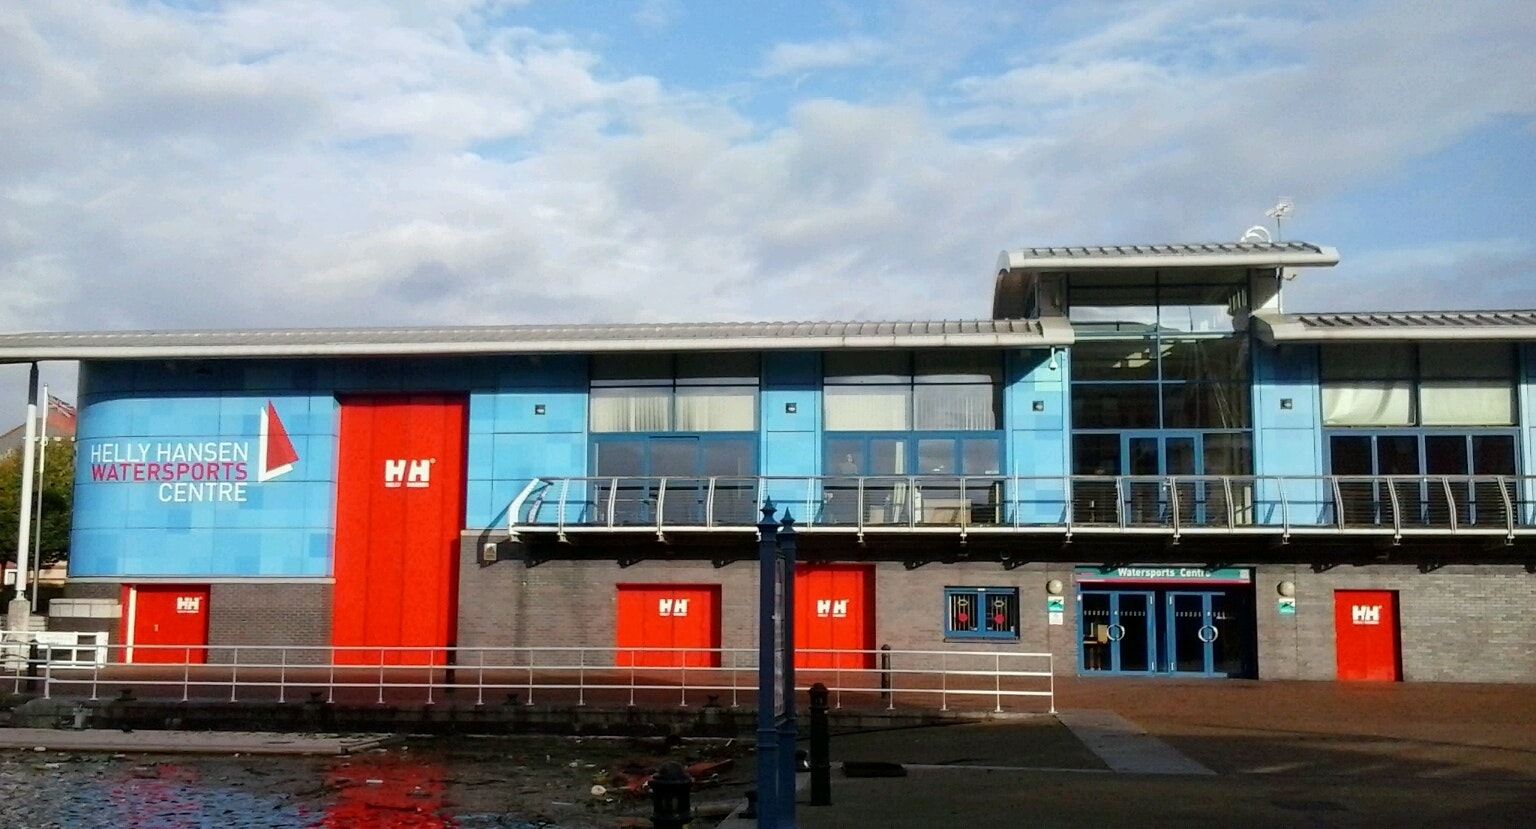 Meeting Rooms in Salford - Helly Hansen Watersports Centre - Events in Whole Venue - Banner